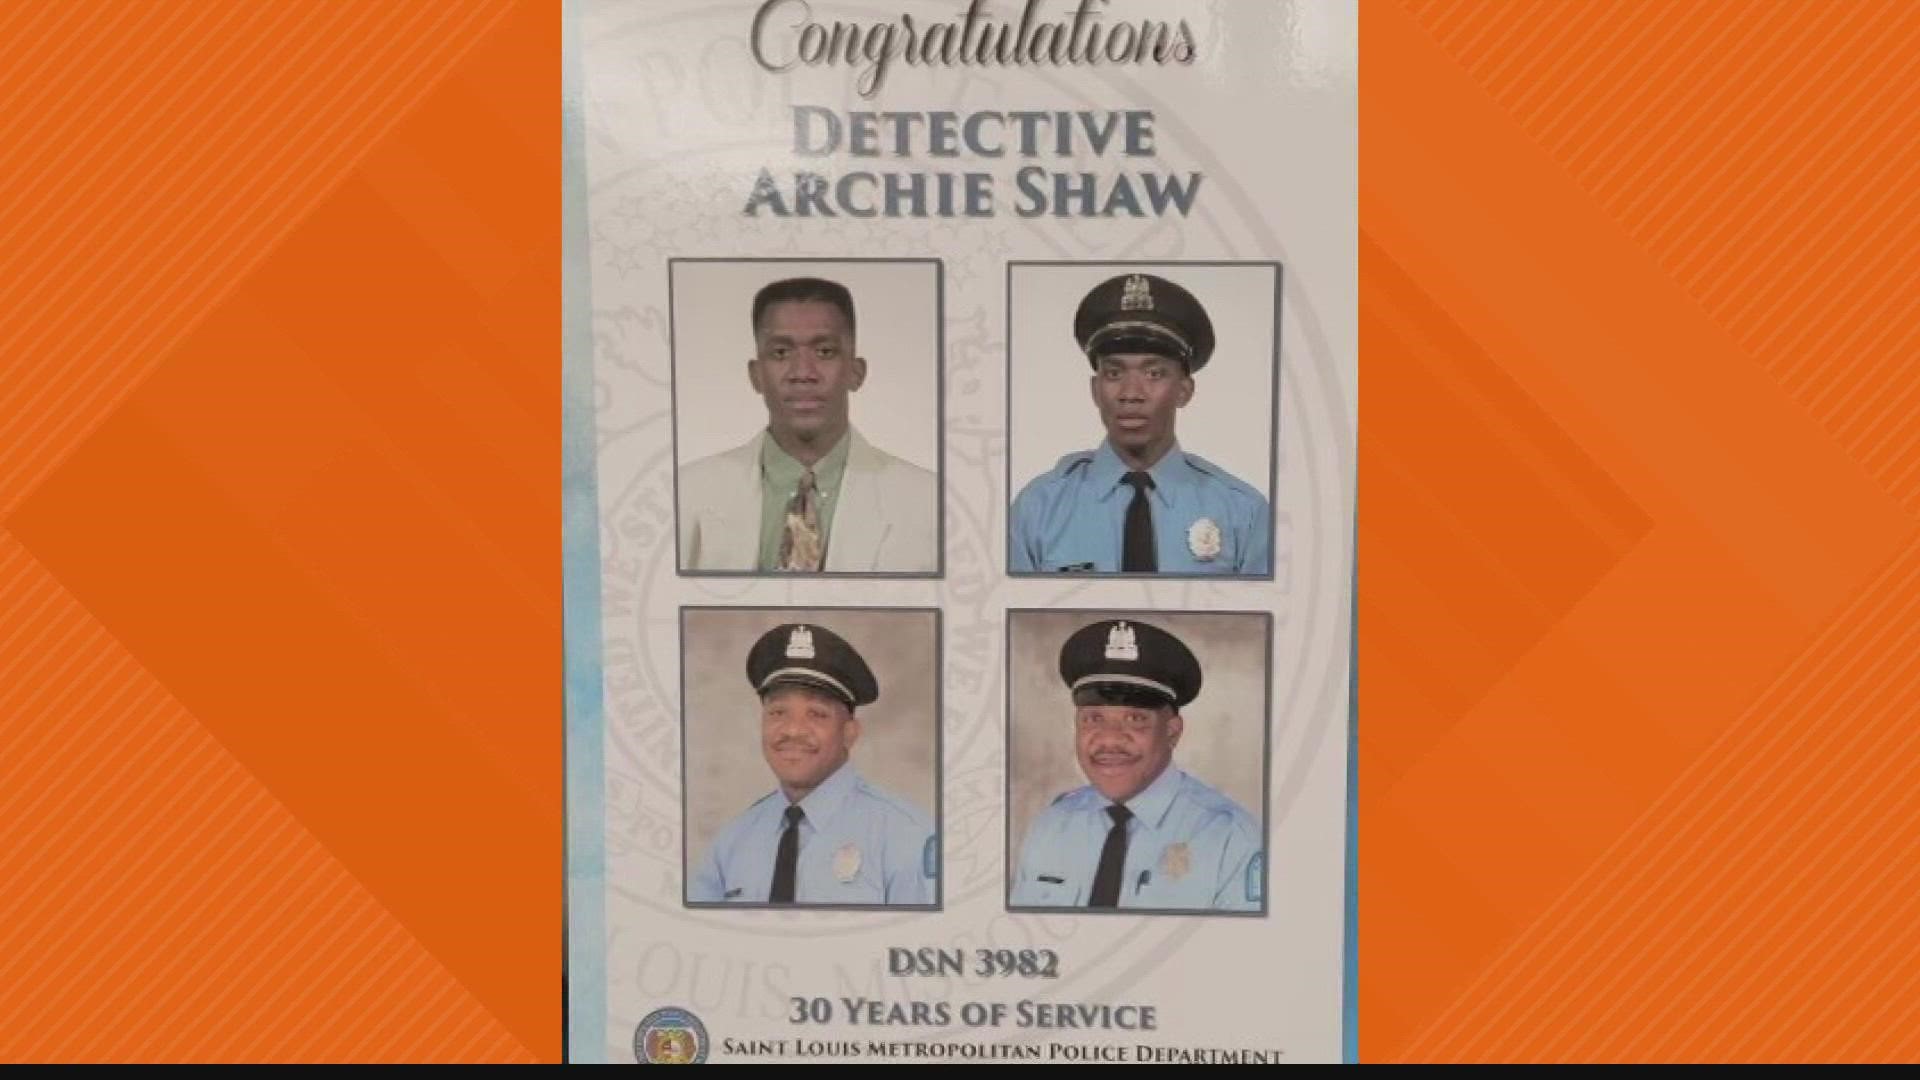 Archie Shaw spent 30 years on the St. Louis Metropolitan Police Department as a detective. He has also spent many years mentoring kids.